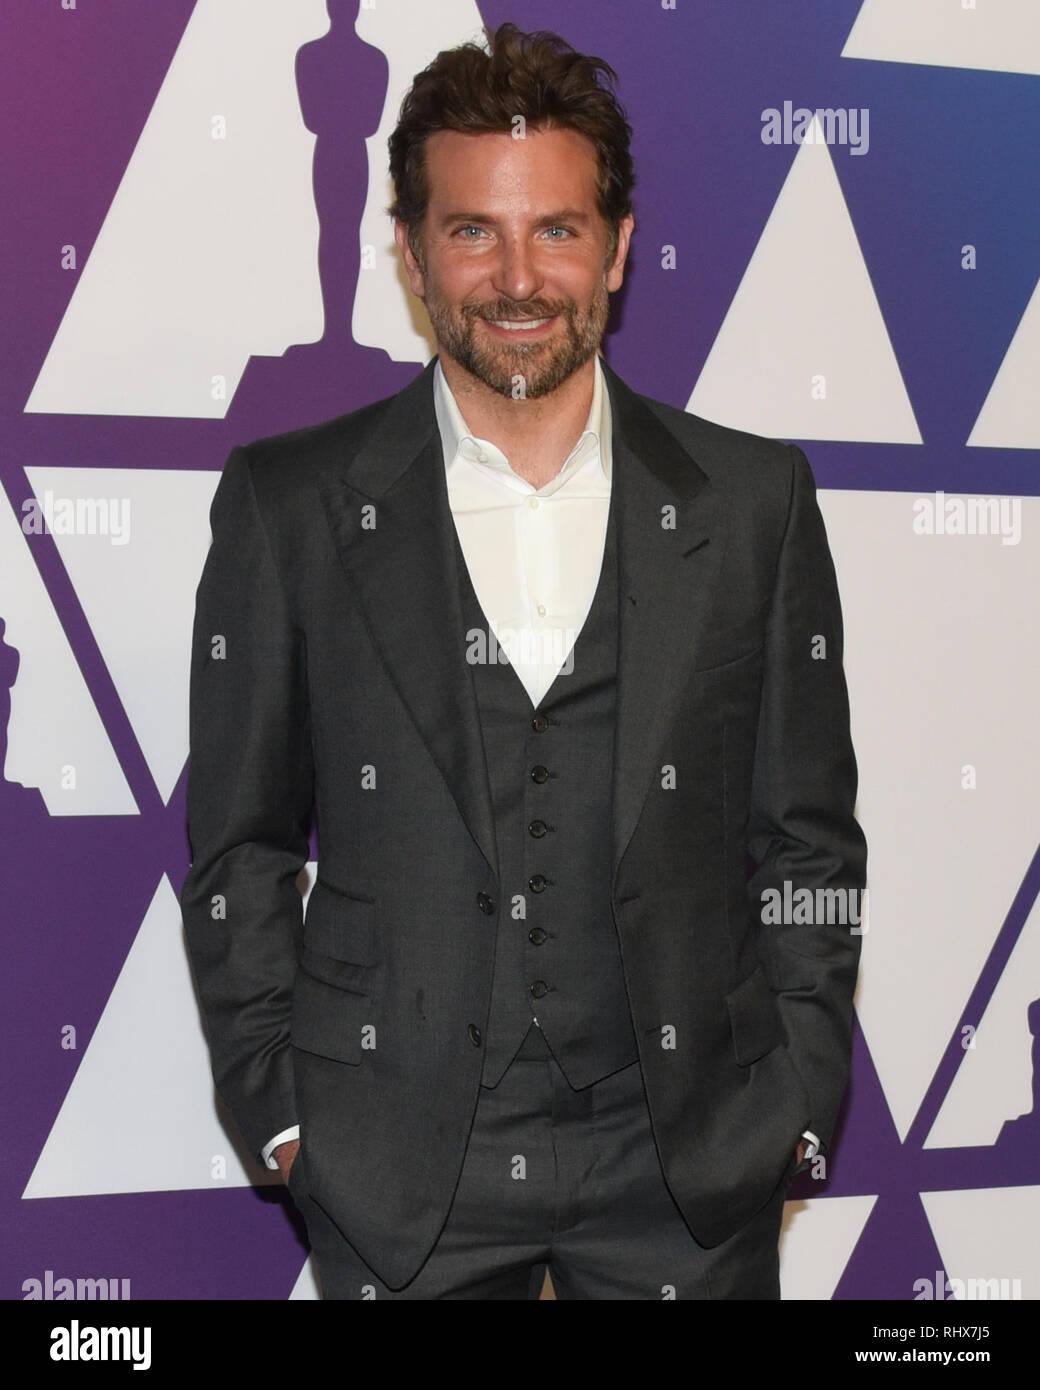 Beverly Hills, California, USA. 4th Feb, 2019. BRADLEY COOPER attends the 91st Oscars Nominees Luncheon at The Beverly Hilton Hotel in Beverly Hills, California. Credit: Billy Bennight/ZUMA Wire/Alamy Live News Stock Photo